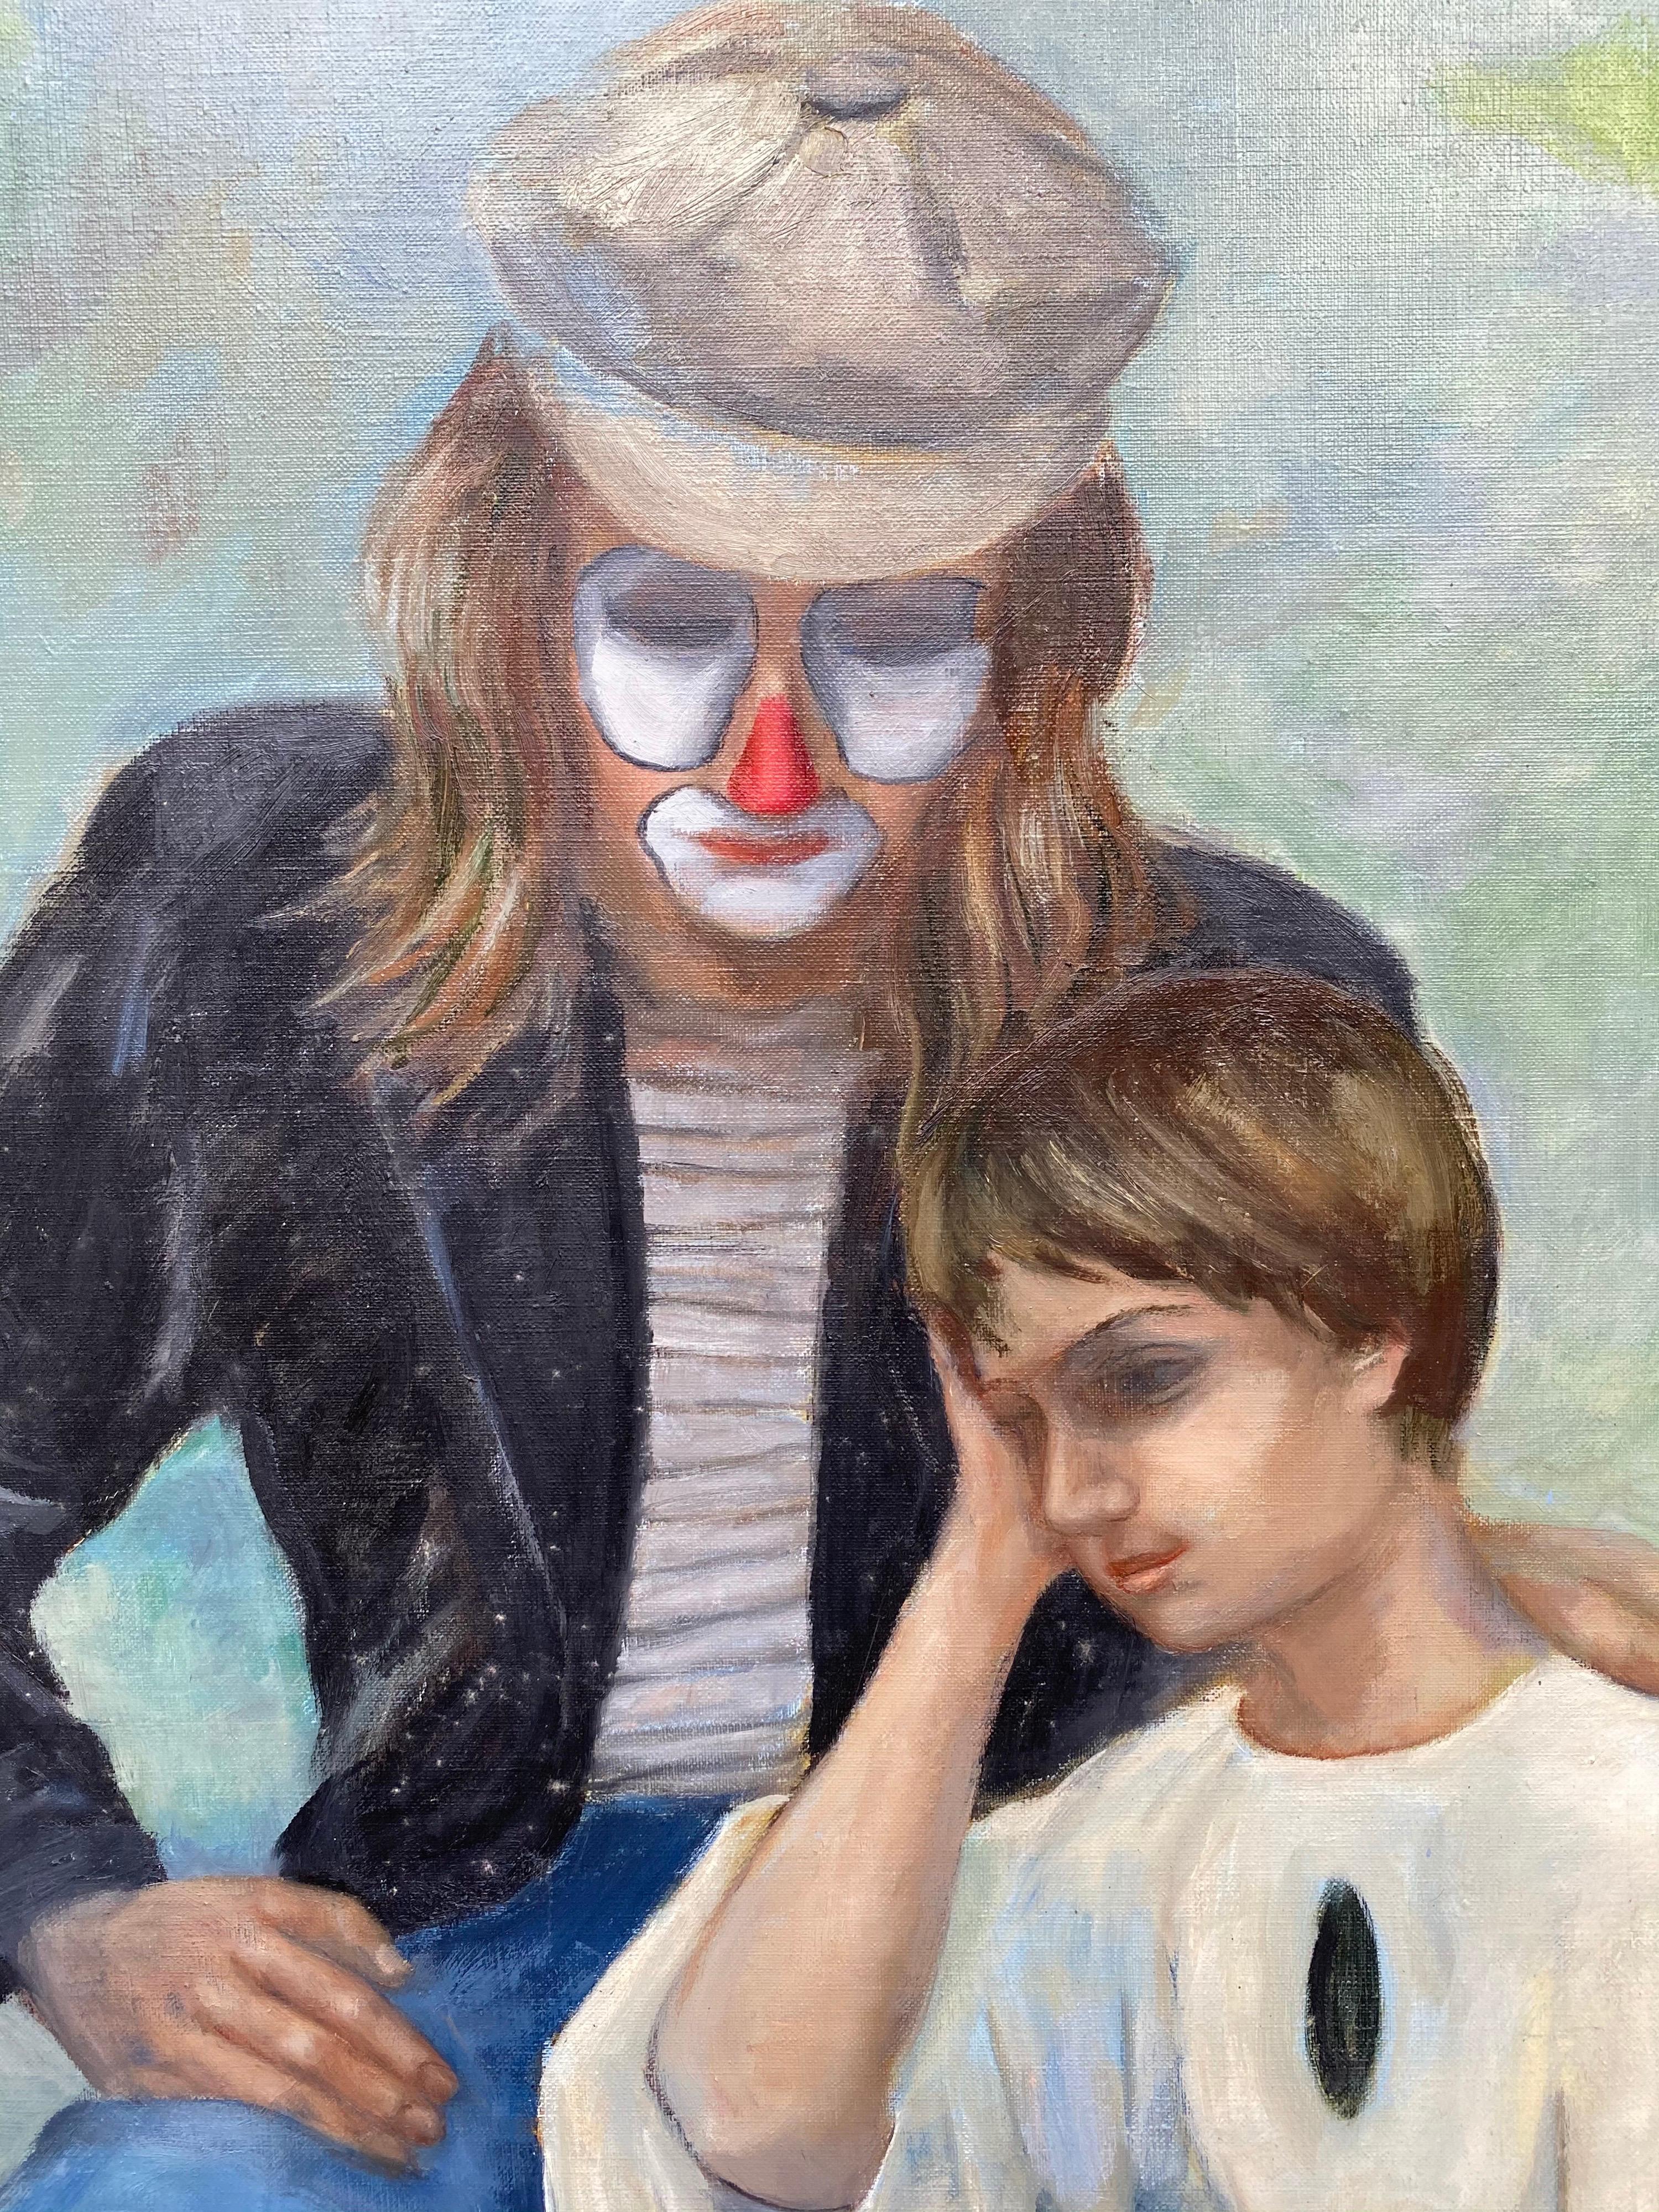 Large 20th Century French Impressionist Oil - Two Circus Clowns/ Performers  - Painting by Yvette Bossiere